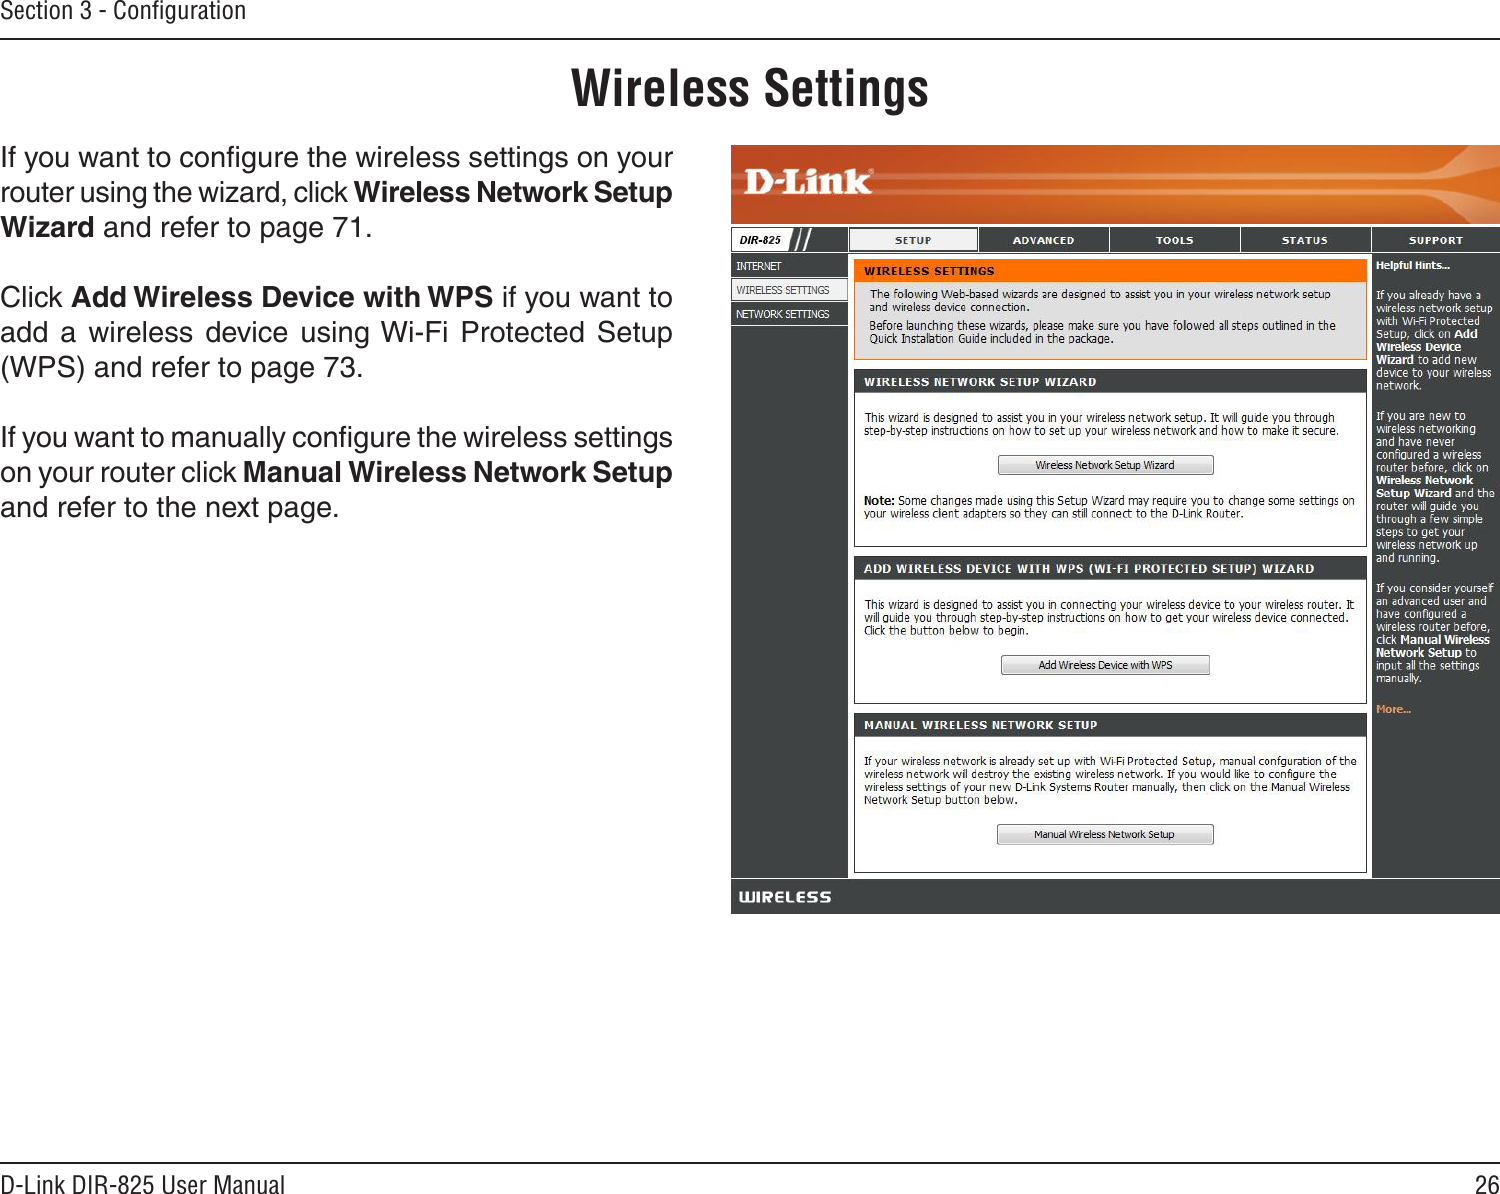 26D-Link DIR-825 User ManualSection 3 - ConﬁgurationWireless SettingsIf you want to conﬁgure the wireless settings on your router using the wizard, click Wireless Network Setup Wizard and refer to page 71.Click Add Wireless Device with WPS if you want to add  a  wireless  device  using Wi-Fi  Protected Setup (WPS) and refer to page 73.If you want to manually conﬁgure the wireless settings on your router click Manual Wireless Network Setup and refer to the next page.